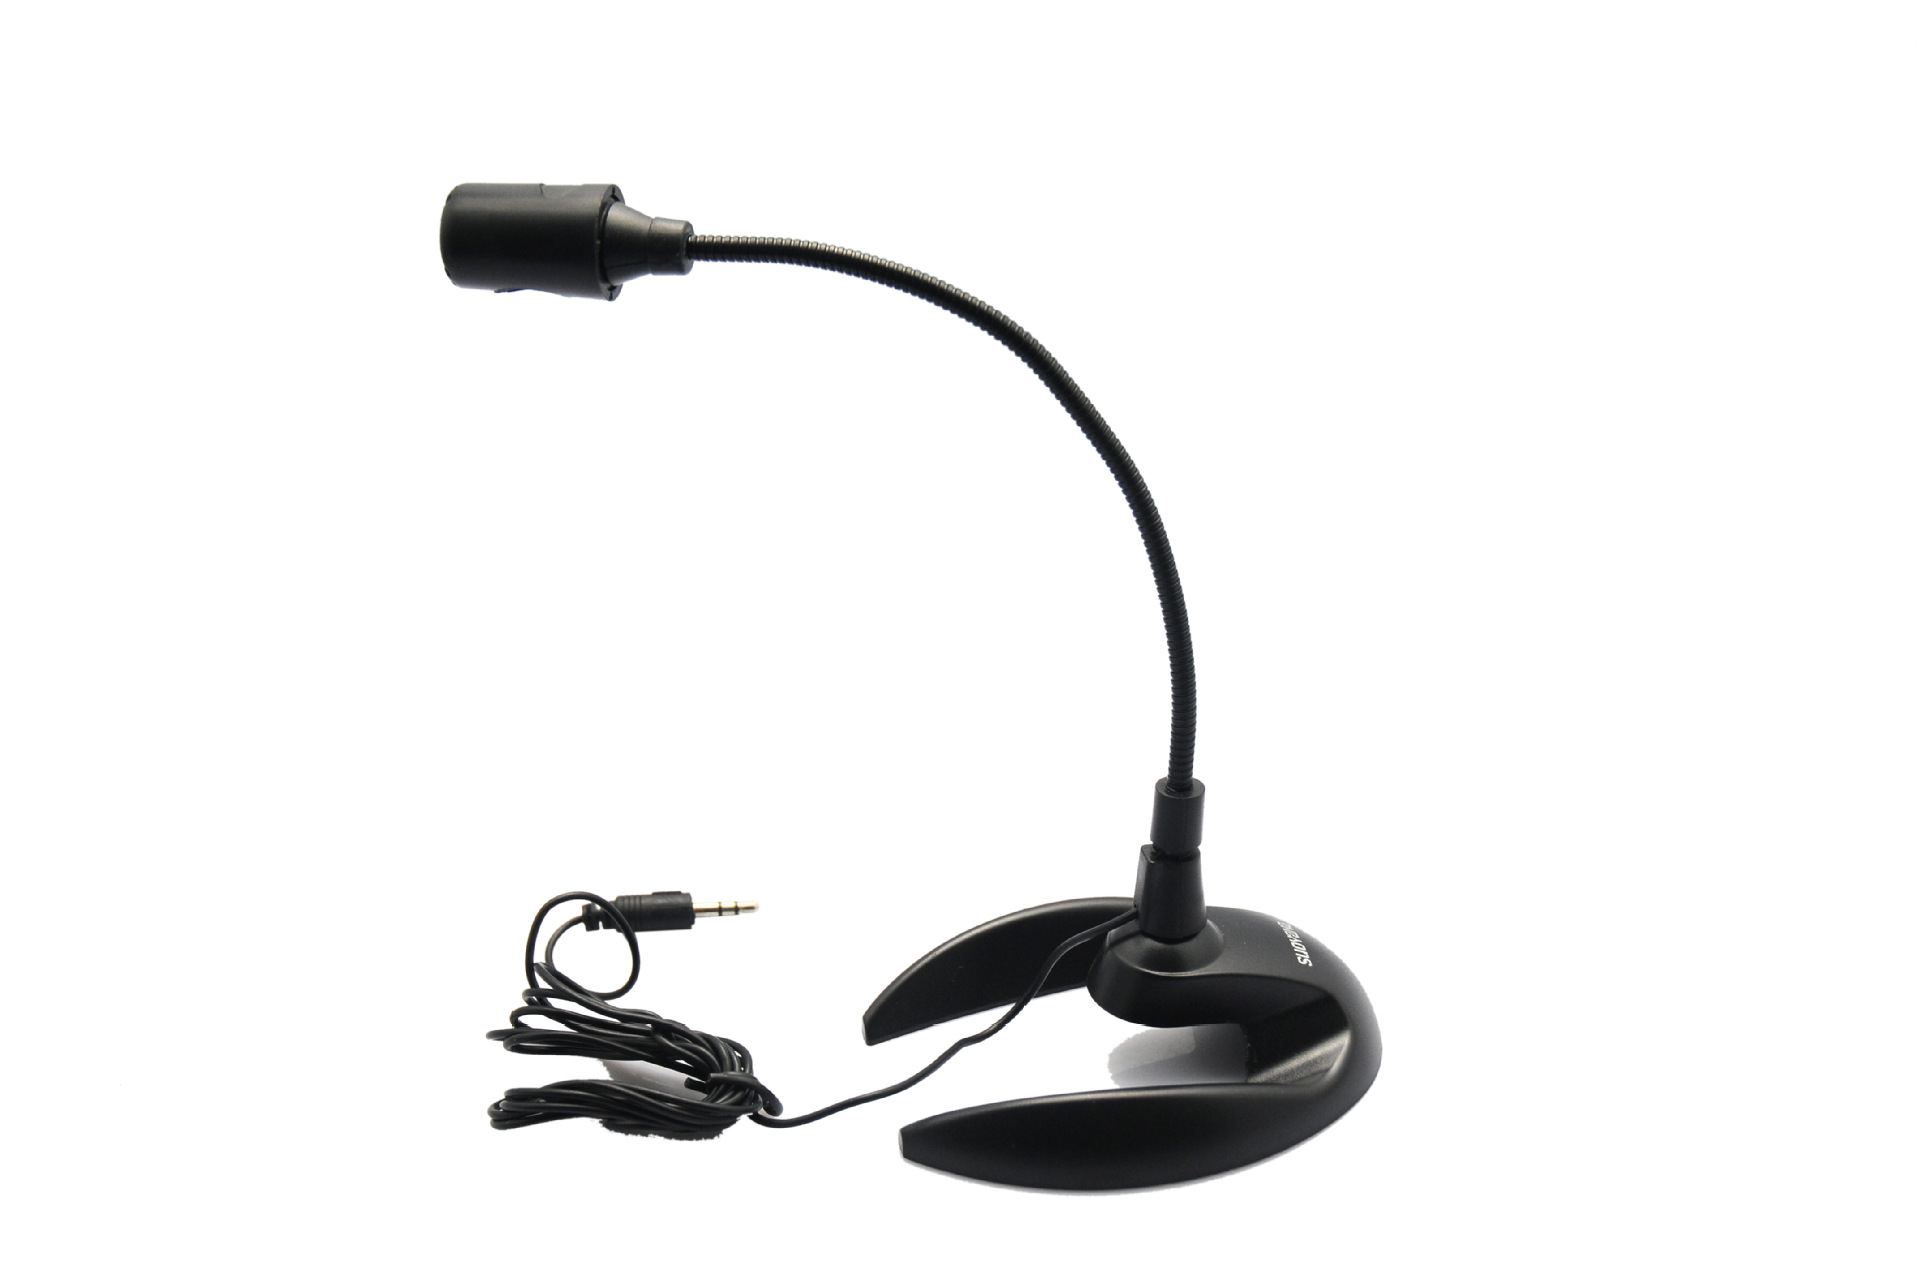 Welcome purchase Cheap Microphone Best Sellers computer Meeting switch microphone wholesale Mike